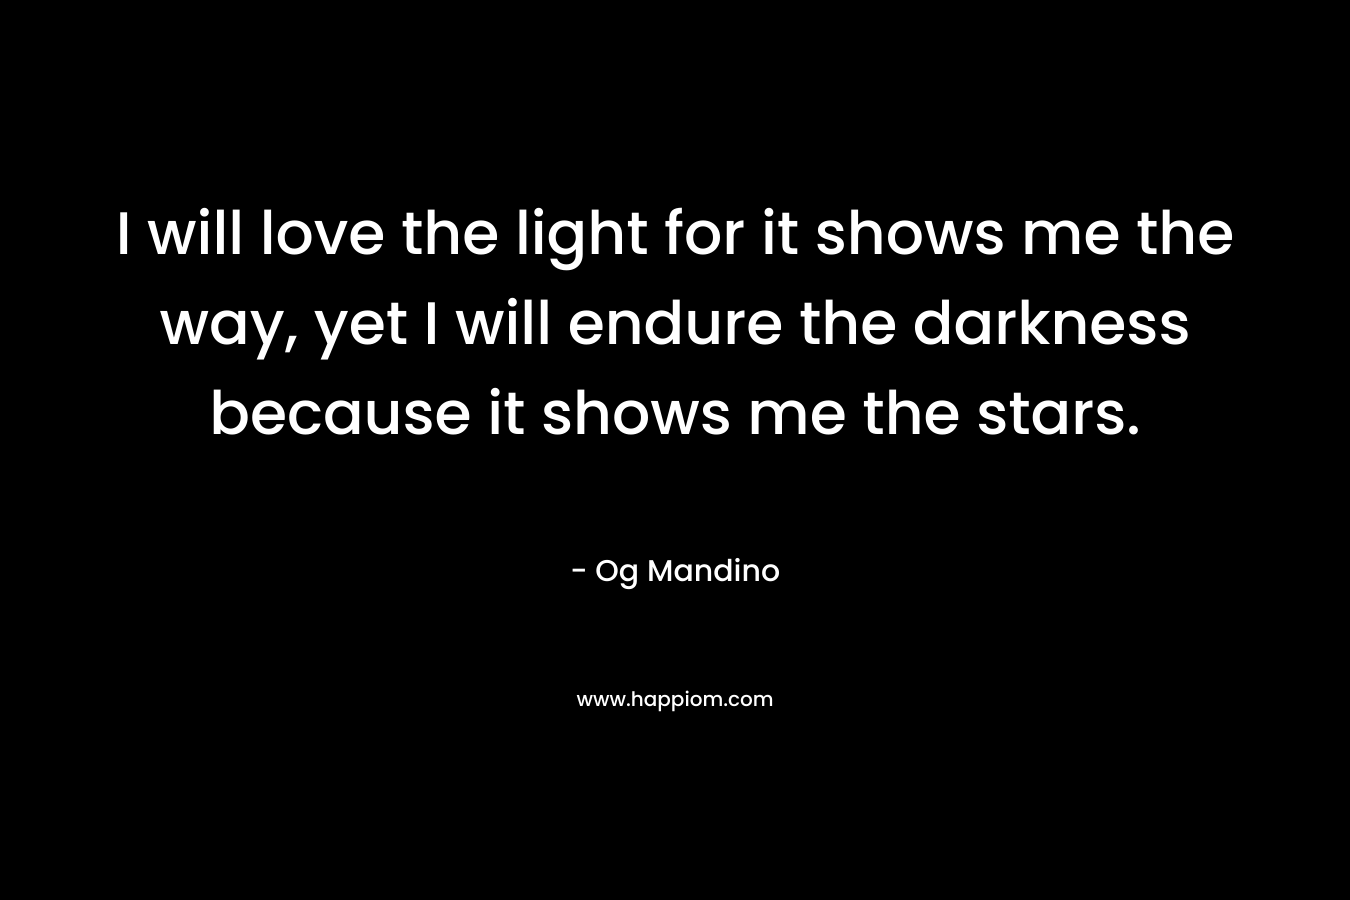 I will love the light for it shows me the way, yet I will endure the darkness because it shows me the stars. – Og Mandino